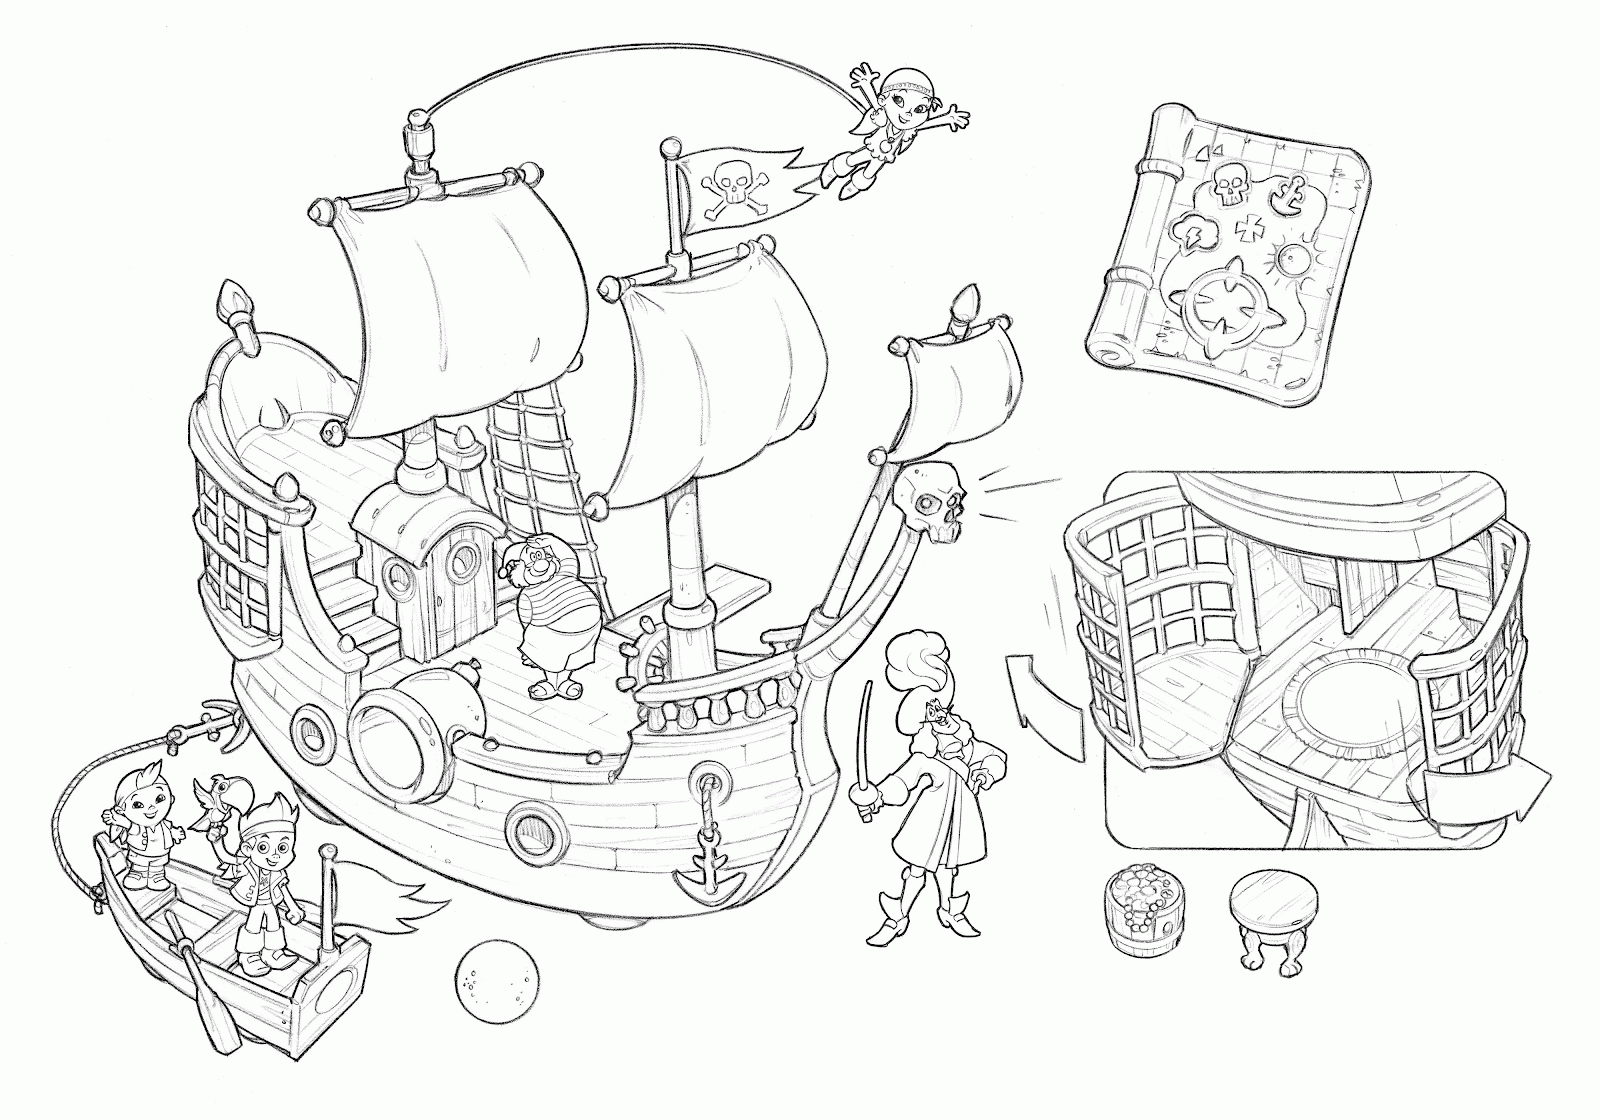 Coloring Pages For Captain Jake And The Neverland Pirates